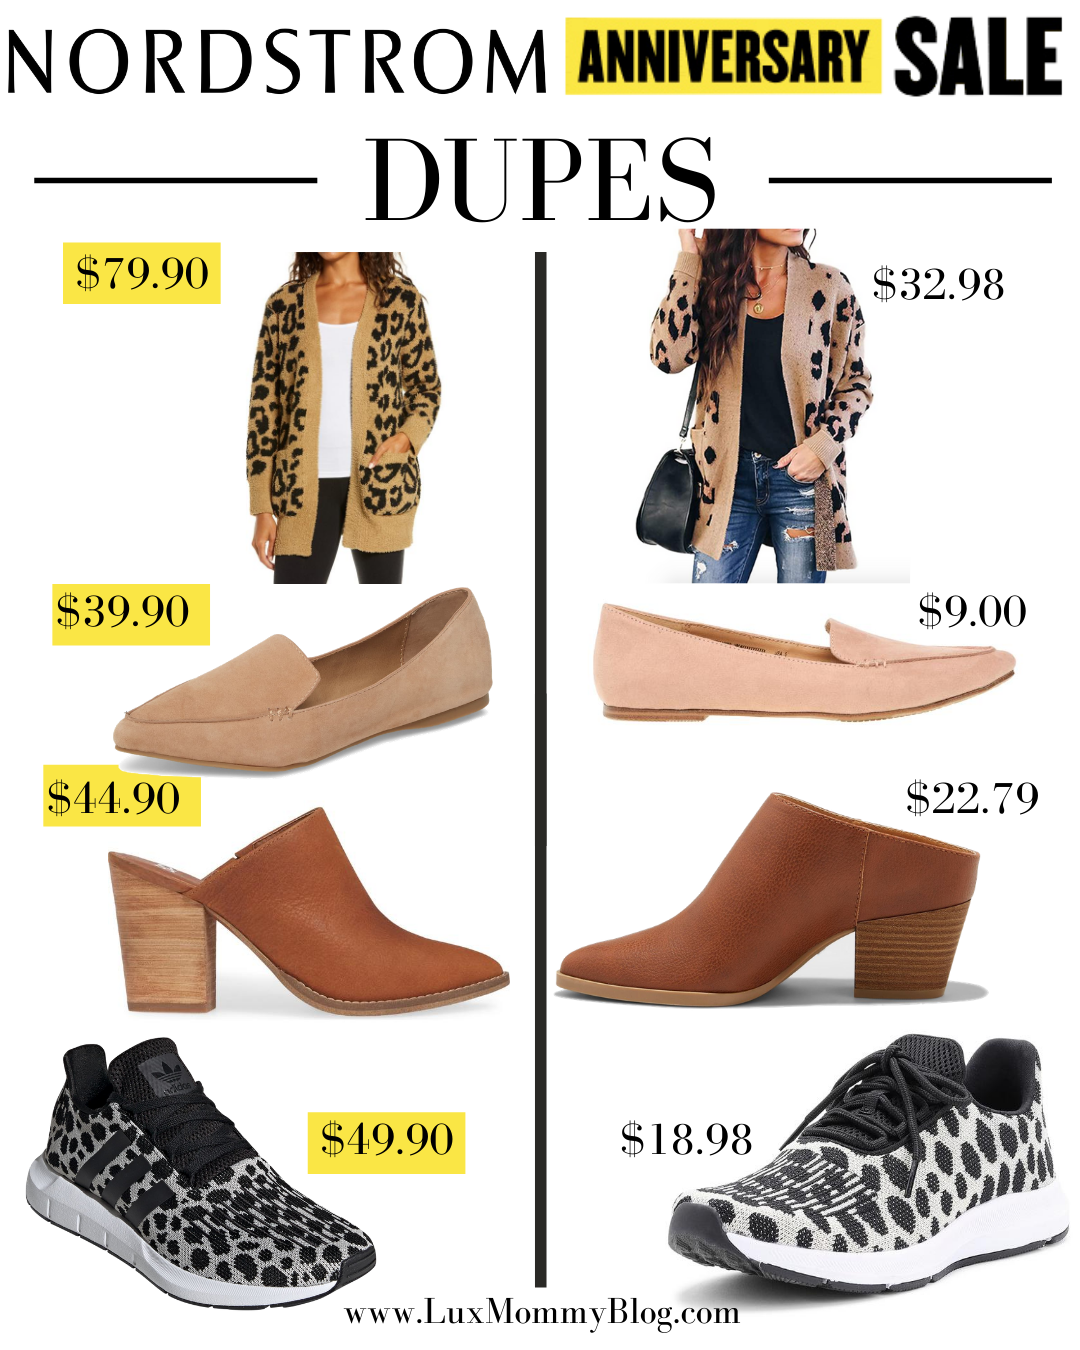 Nordstrom Anniversary Sale dupes